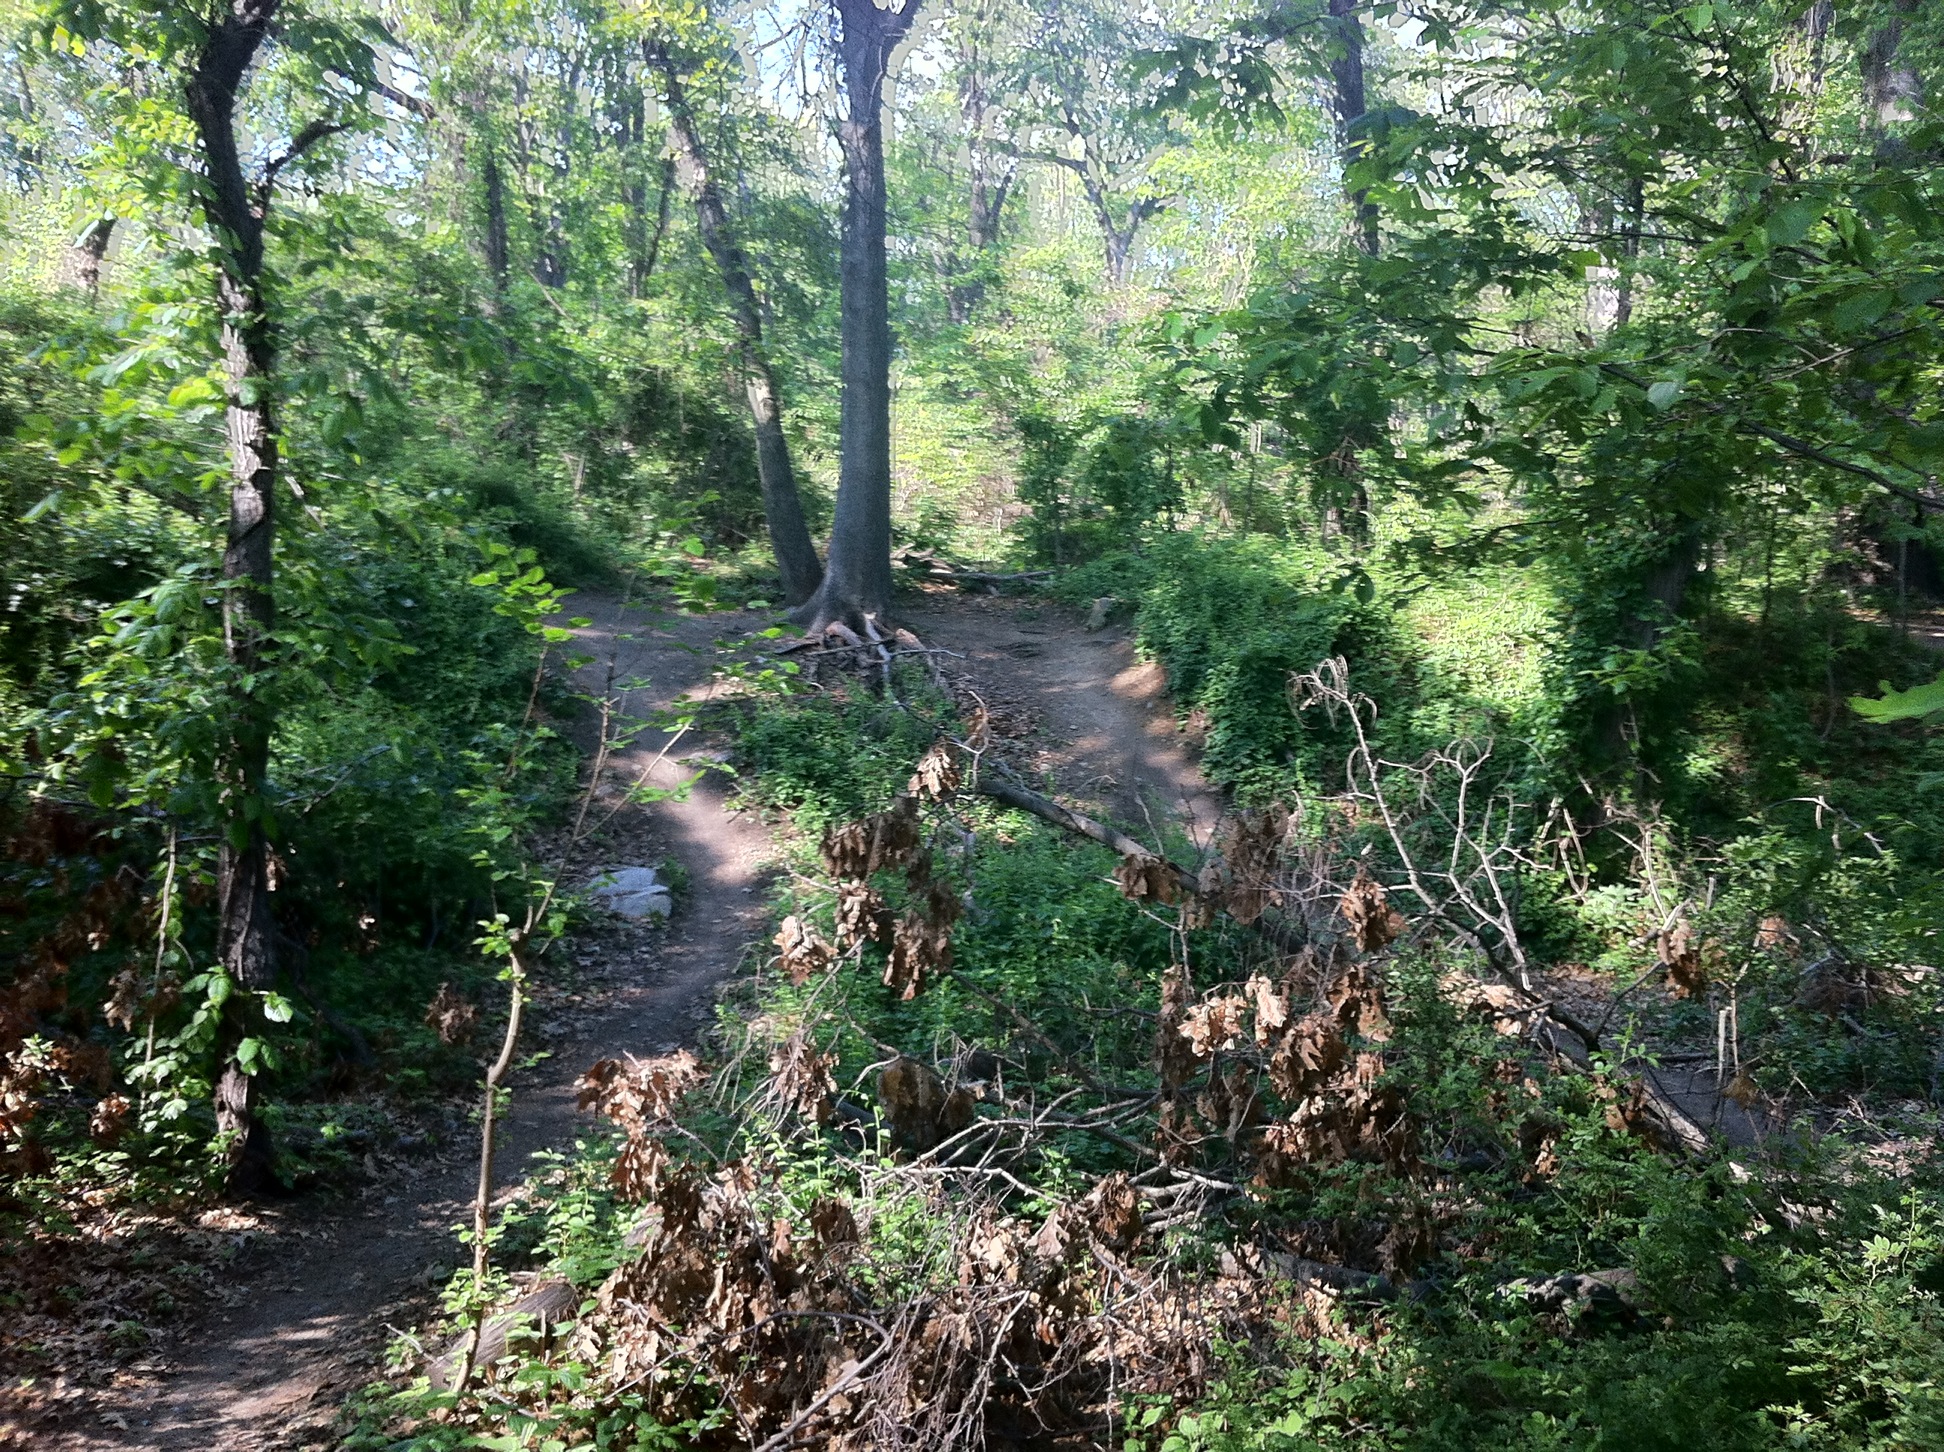 A "More Difficult" mountain bike trail in Cunningham Park